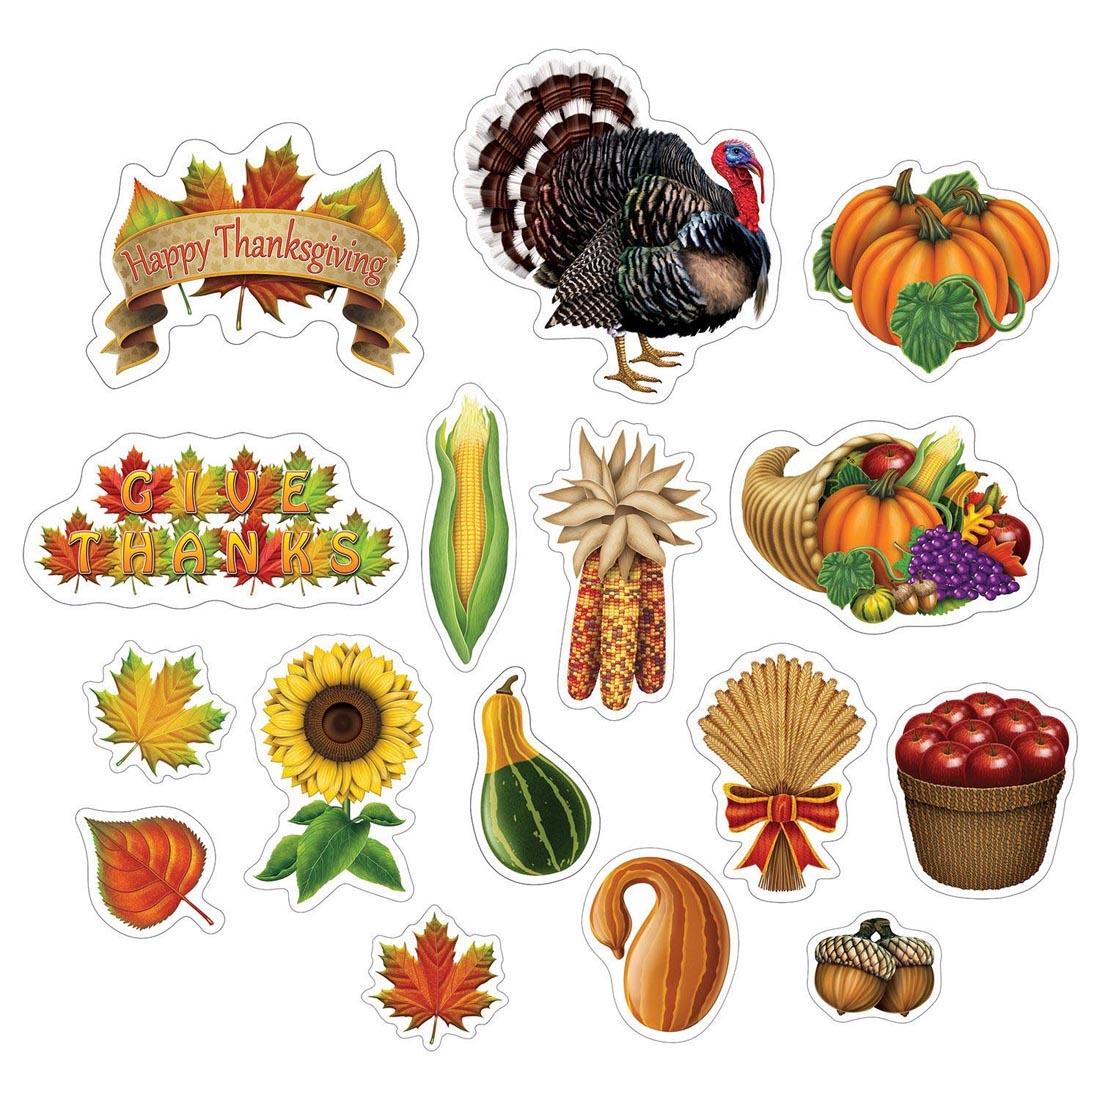 Thanksgiving Cut-Outs By Beistle Company including a turkey, cornucopia, sunflower, basket of apples and more